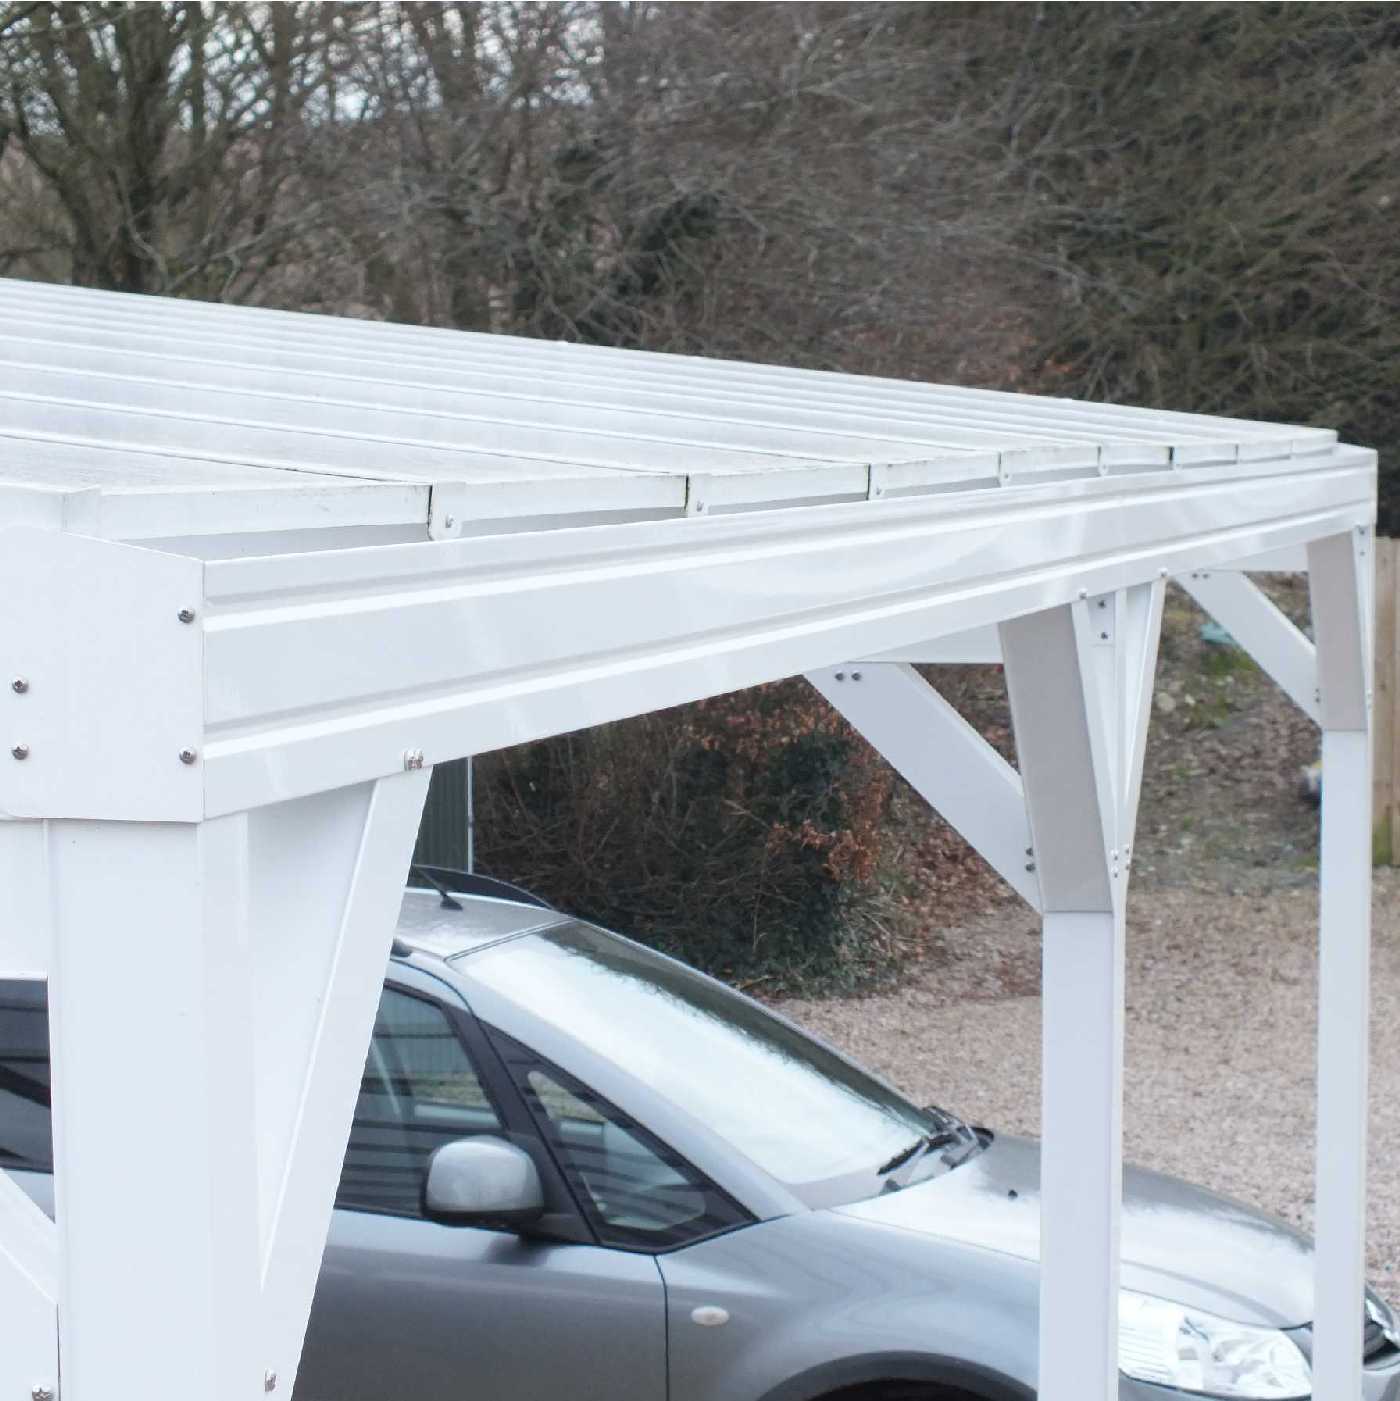 Omega Smart Free-Standing, White MonoPitch Roof Canopy with 16mm Polycarbonate Glazing - 3.1m (W) x 3.0m (P), (4) Supporting Posts from Omega Build